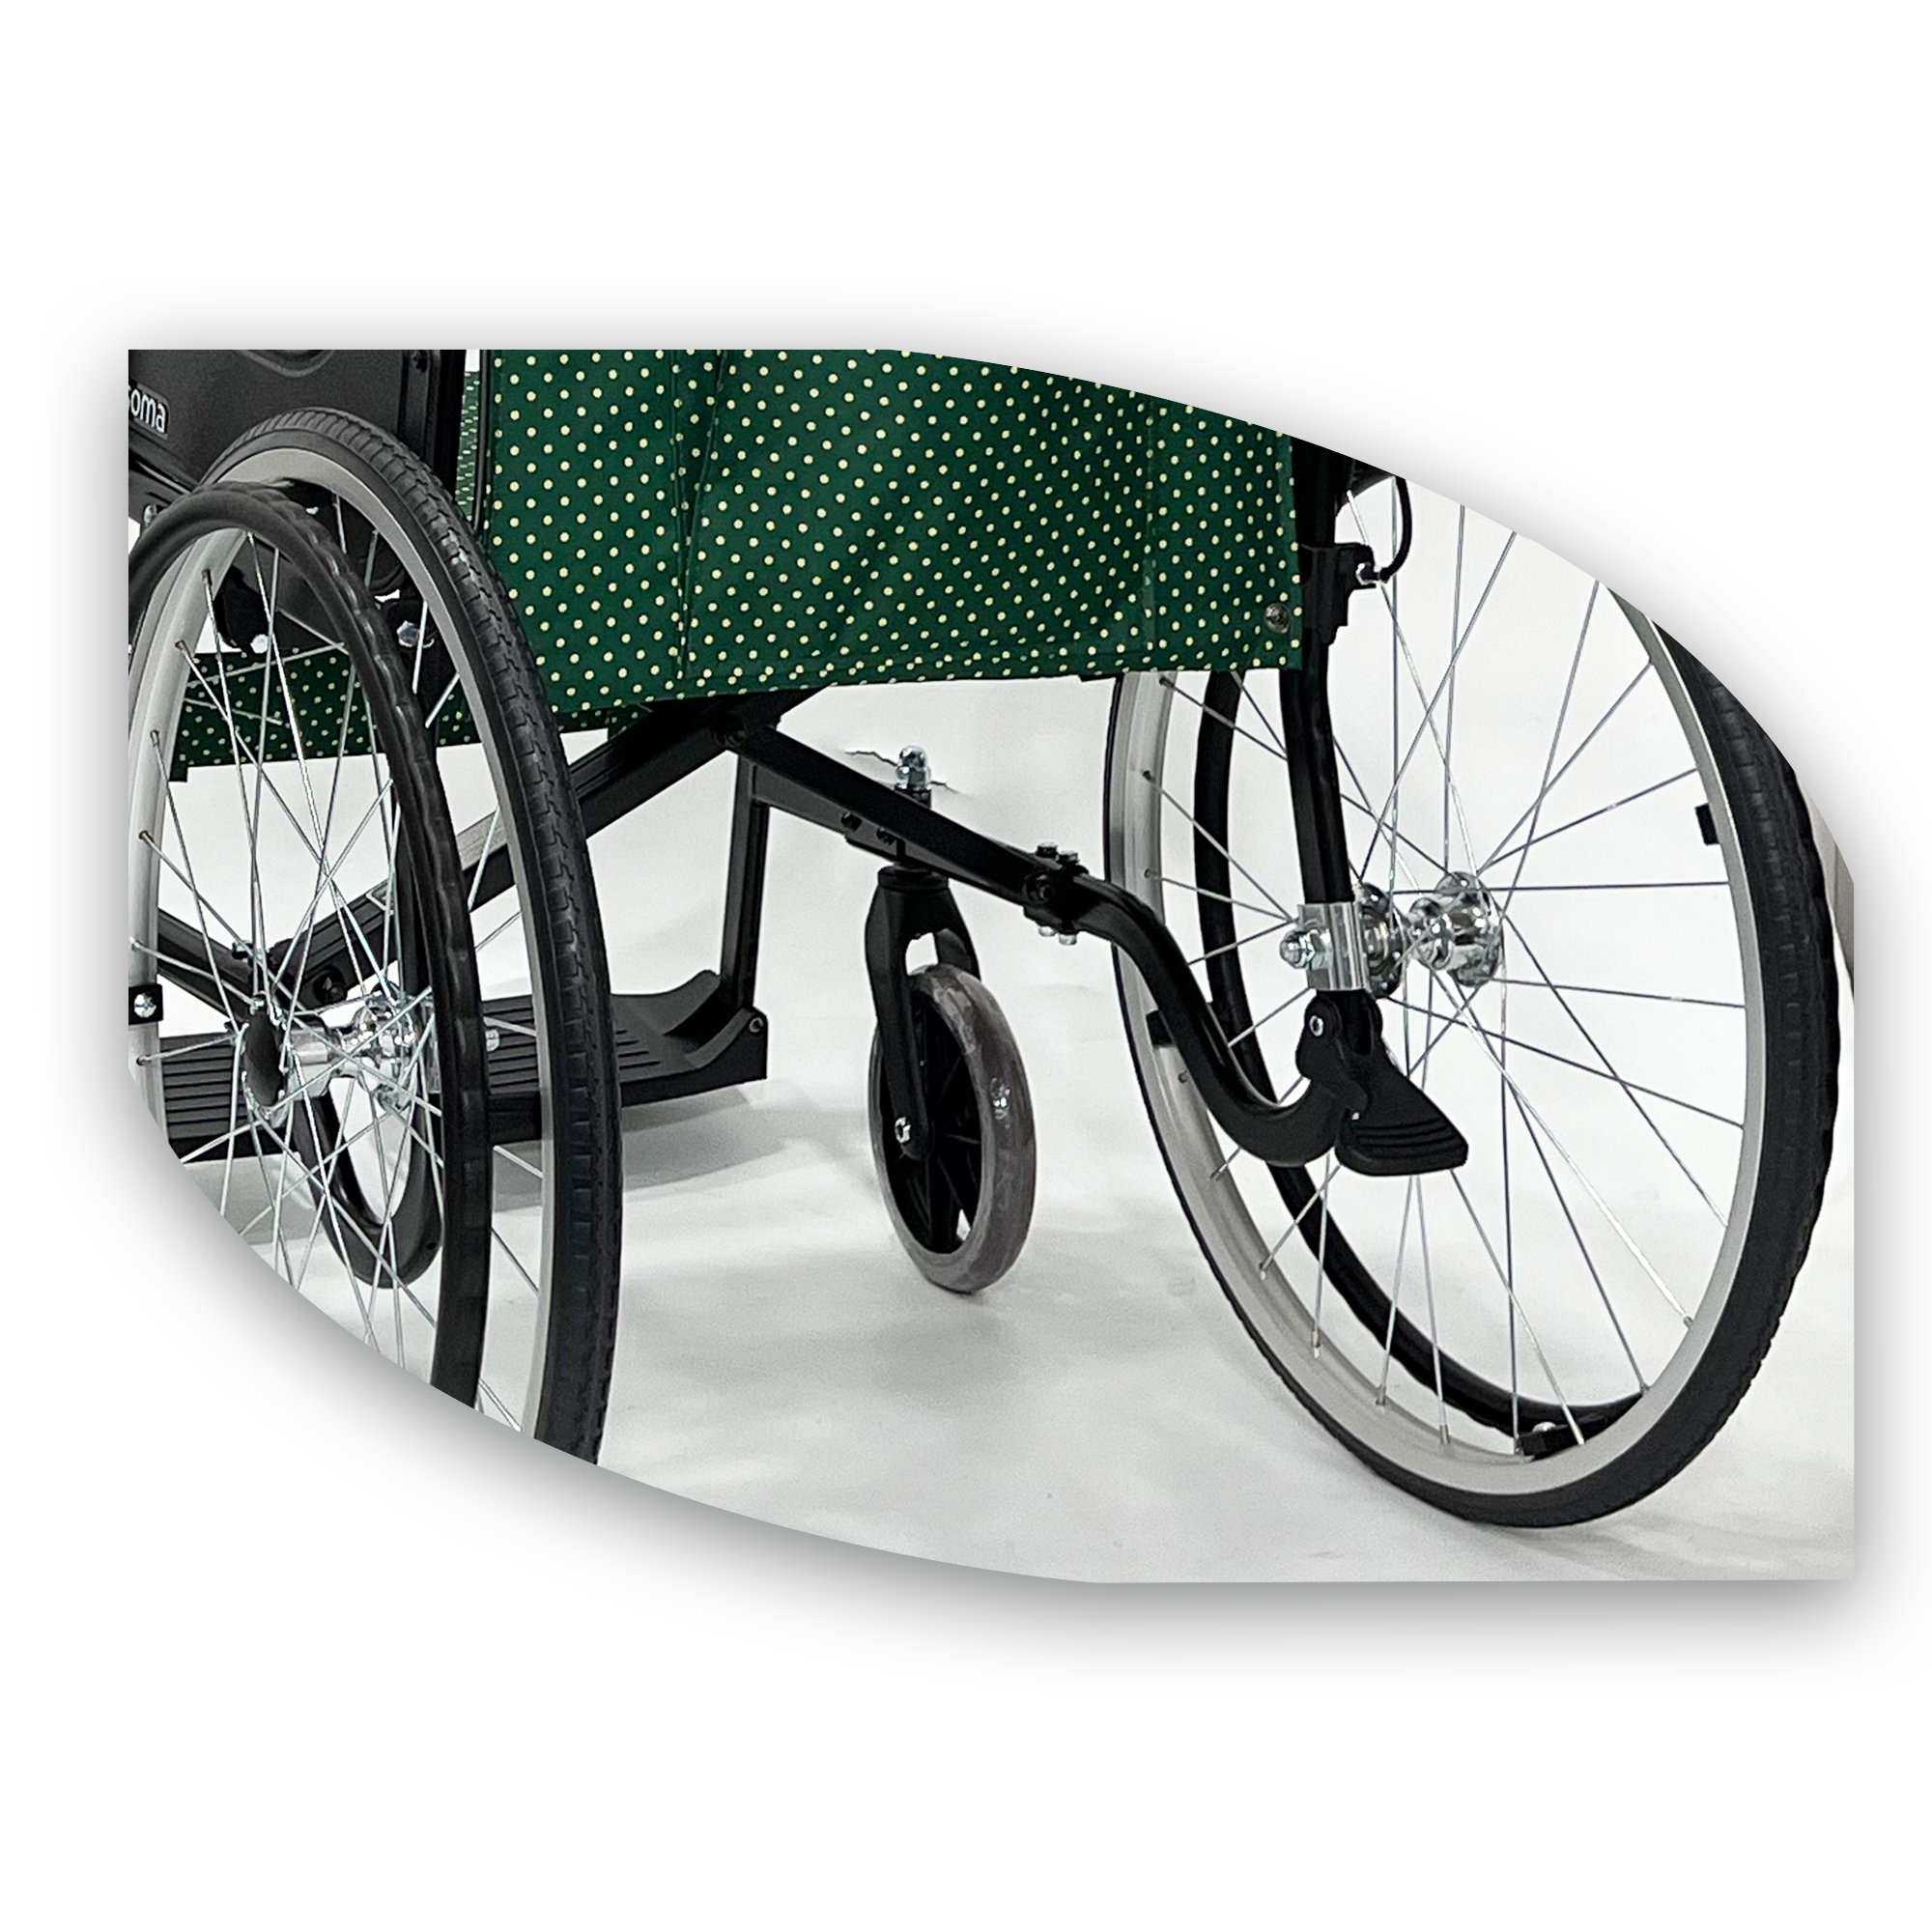 soma standard wheelchair with foldable backrest 18"